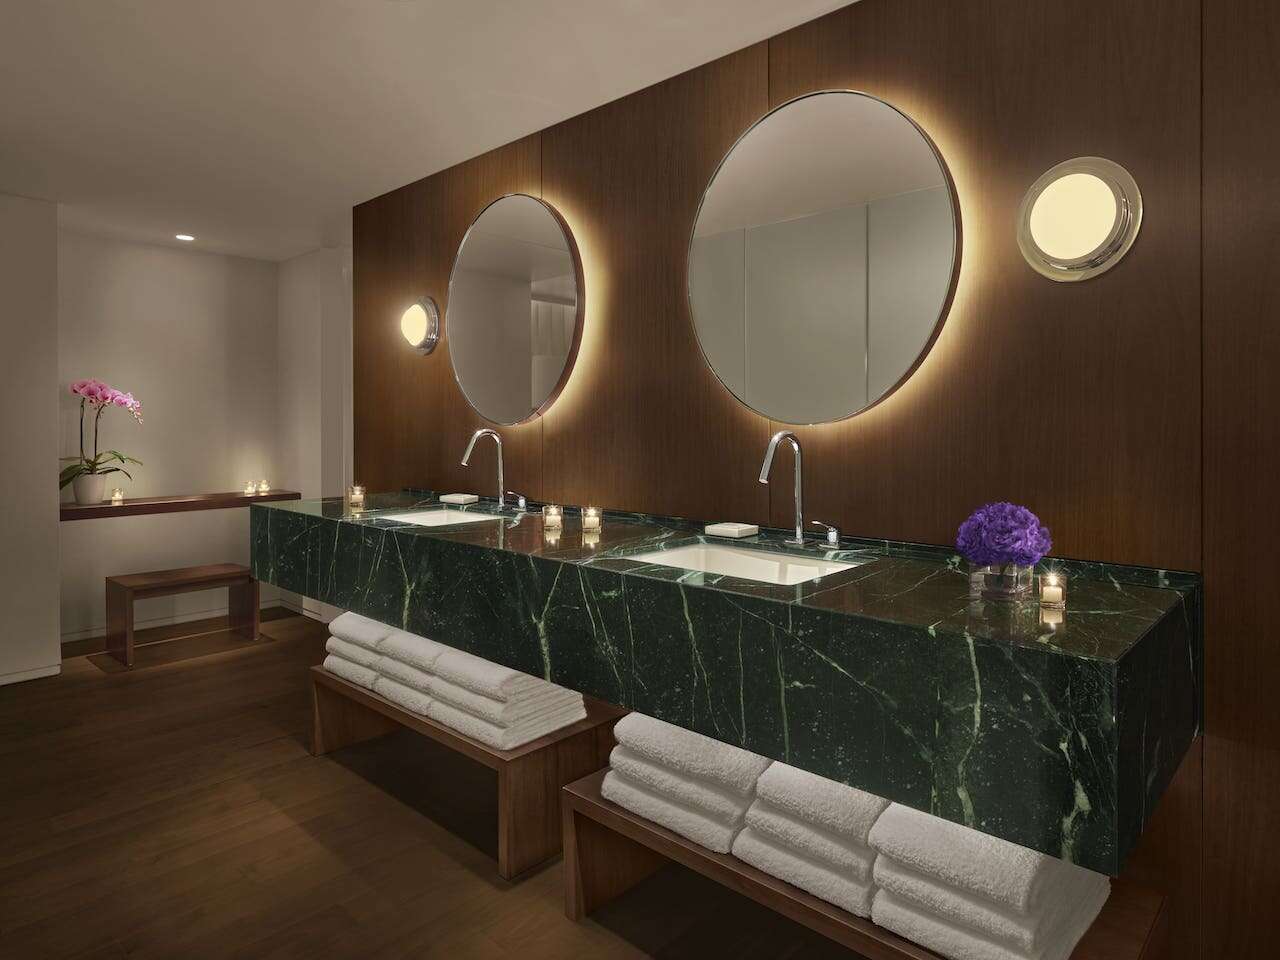 The Penthouse Suite's bathroom, featuring a signature green marble sink.